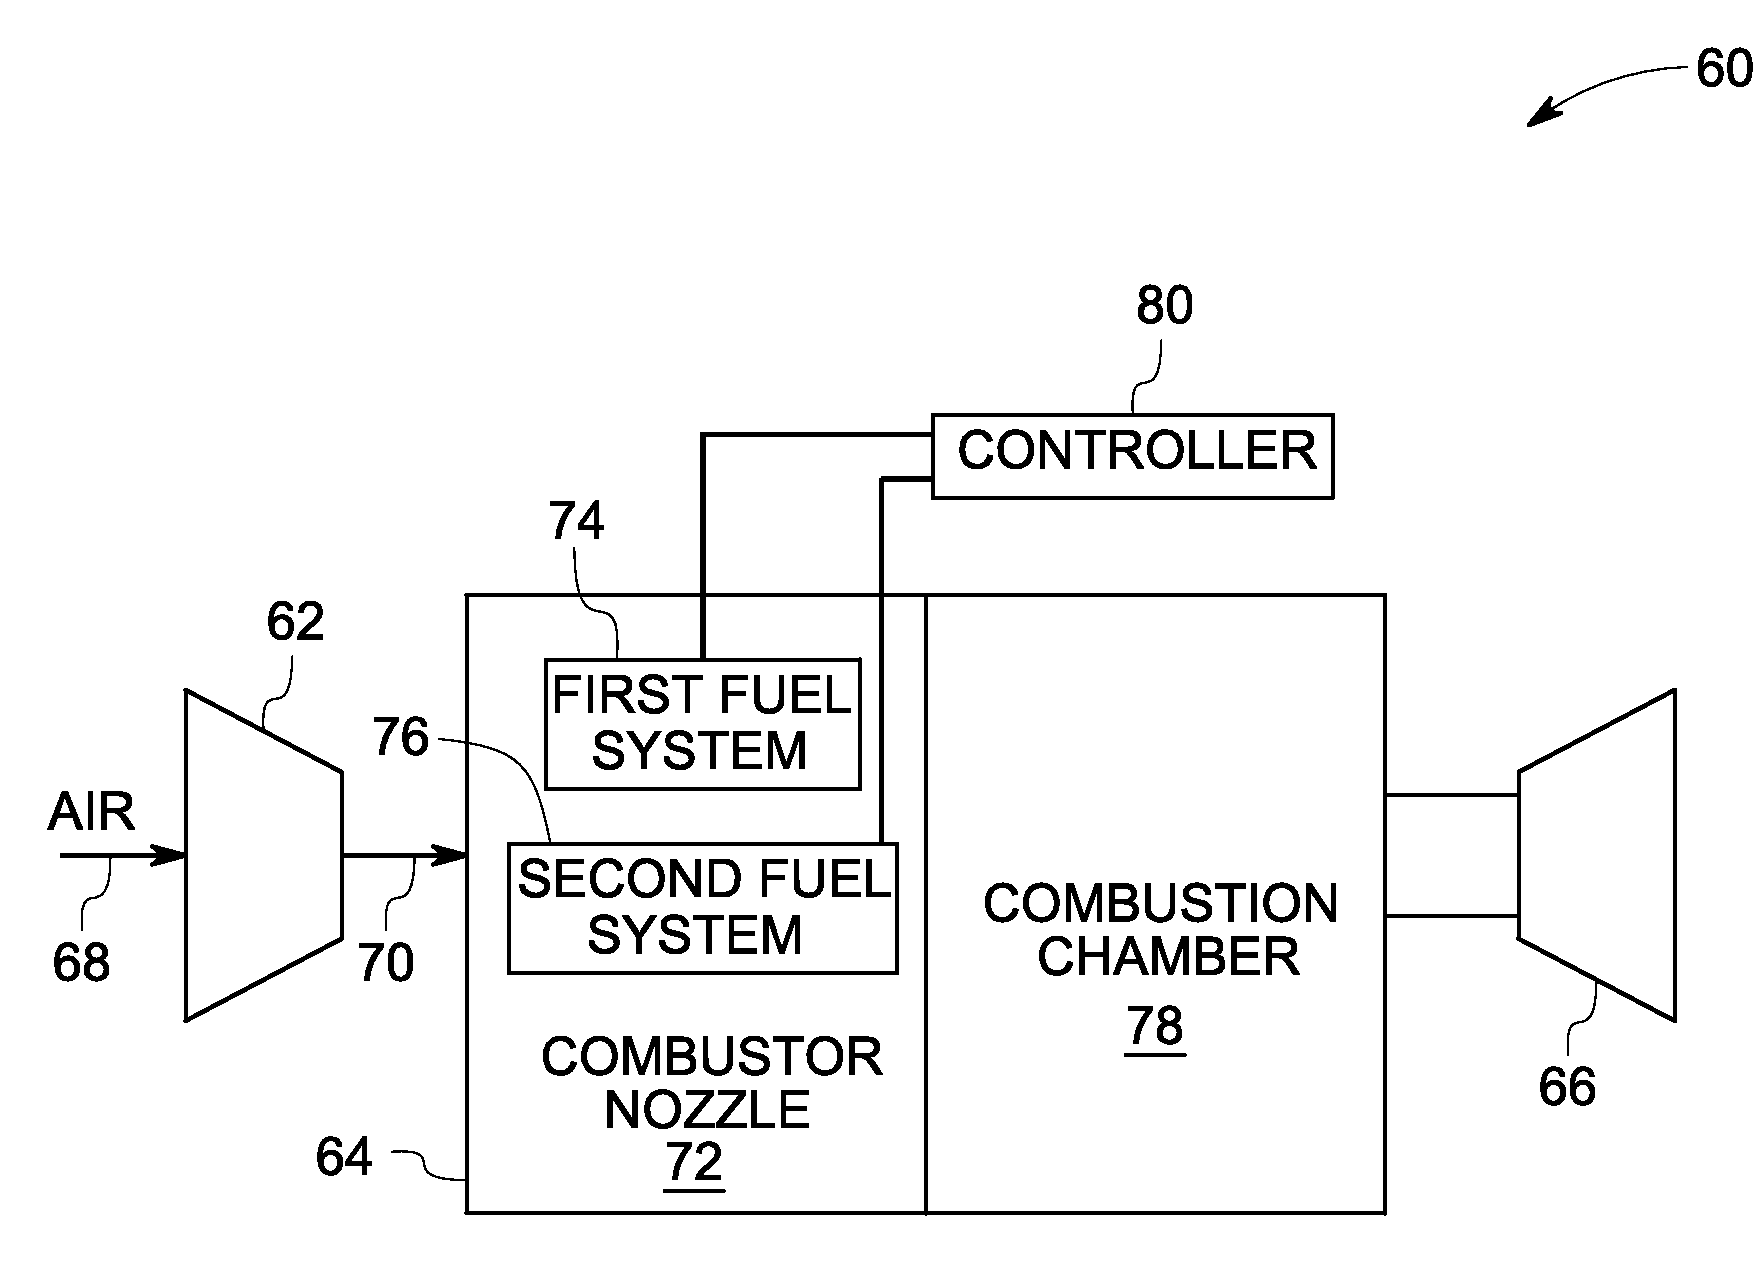 Combustor nozzle for a fuel-flexible combustion system